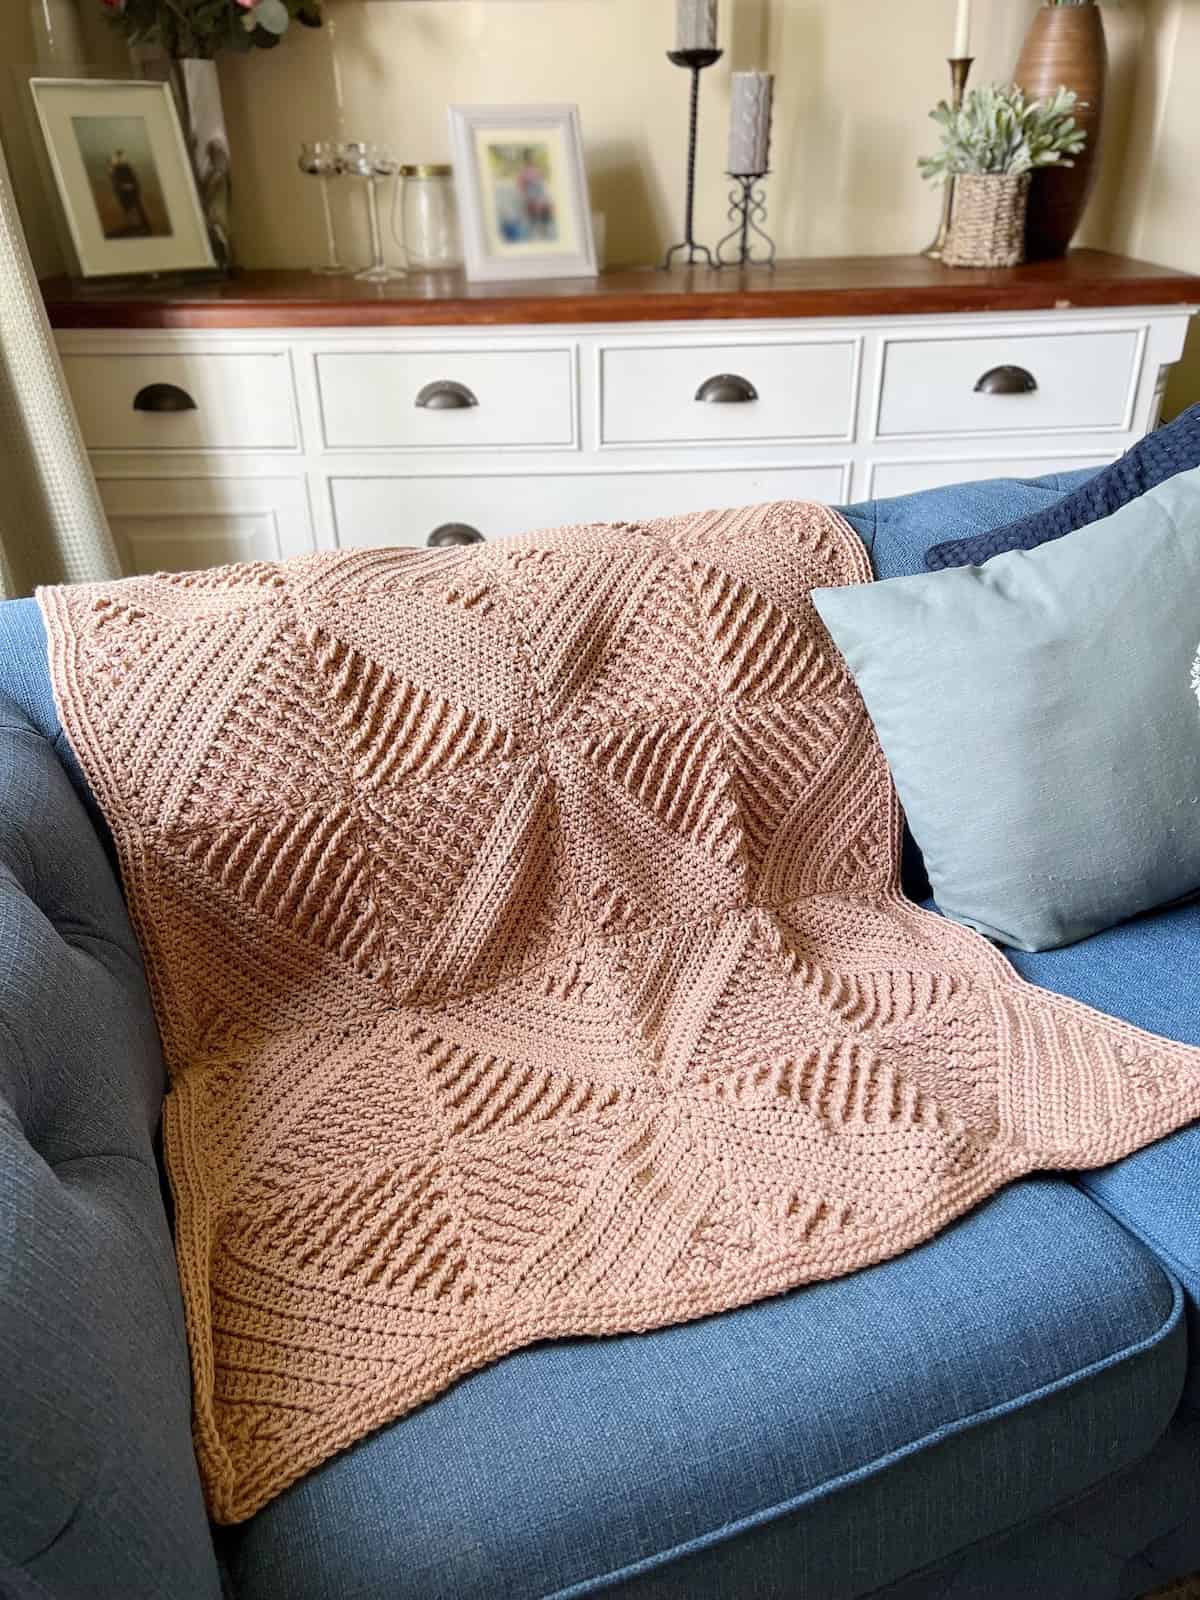 Textured crochet blanket pattern with post stitches on a blue sofa with a dresser in the background.